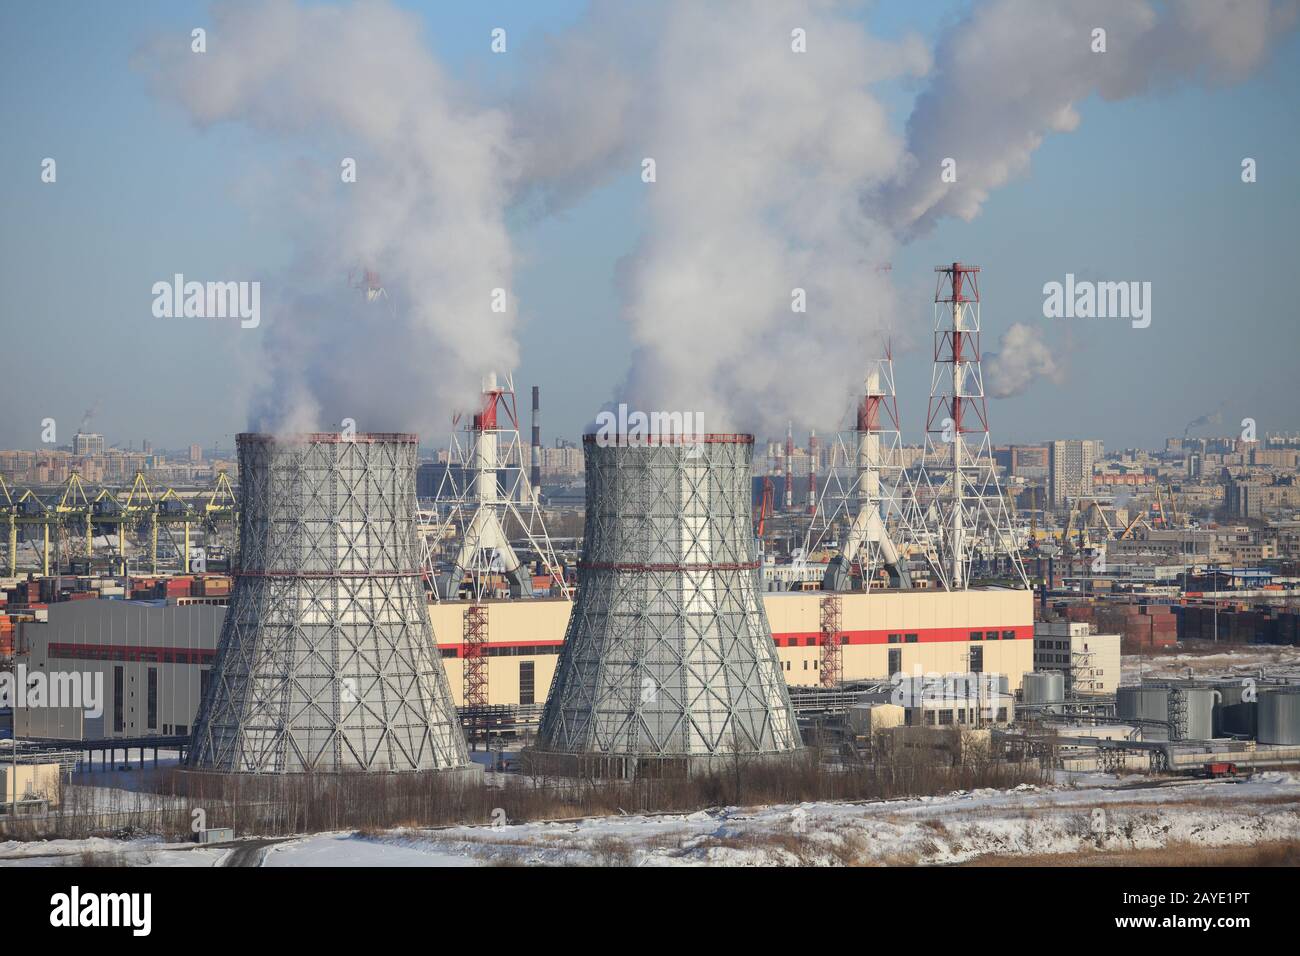 thermal power plant cooling tower in the foreground Stock Photo